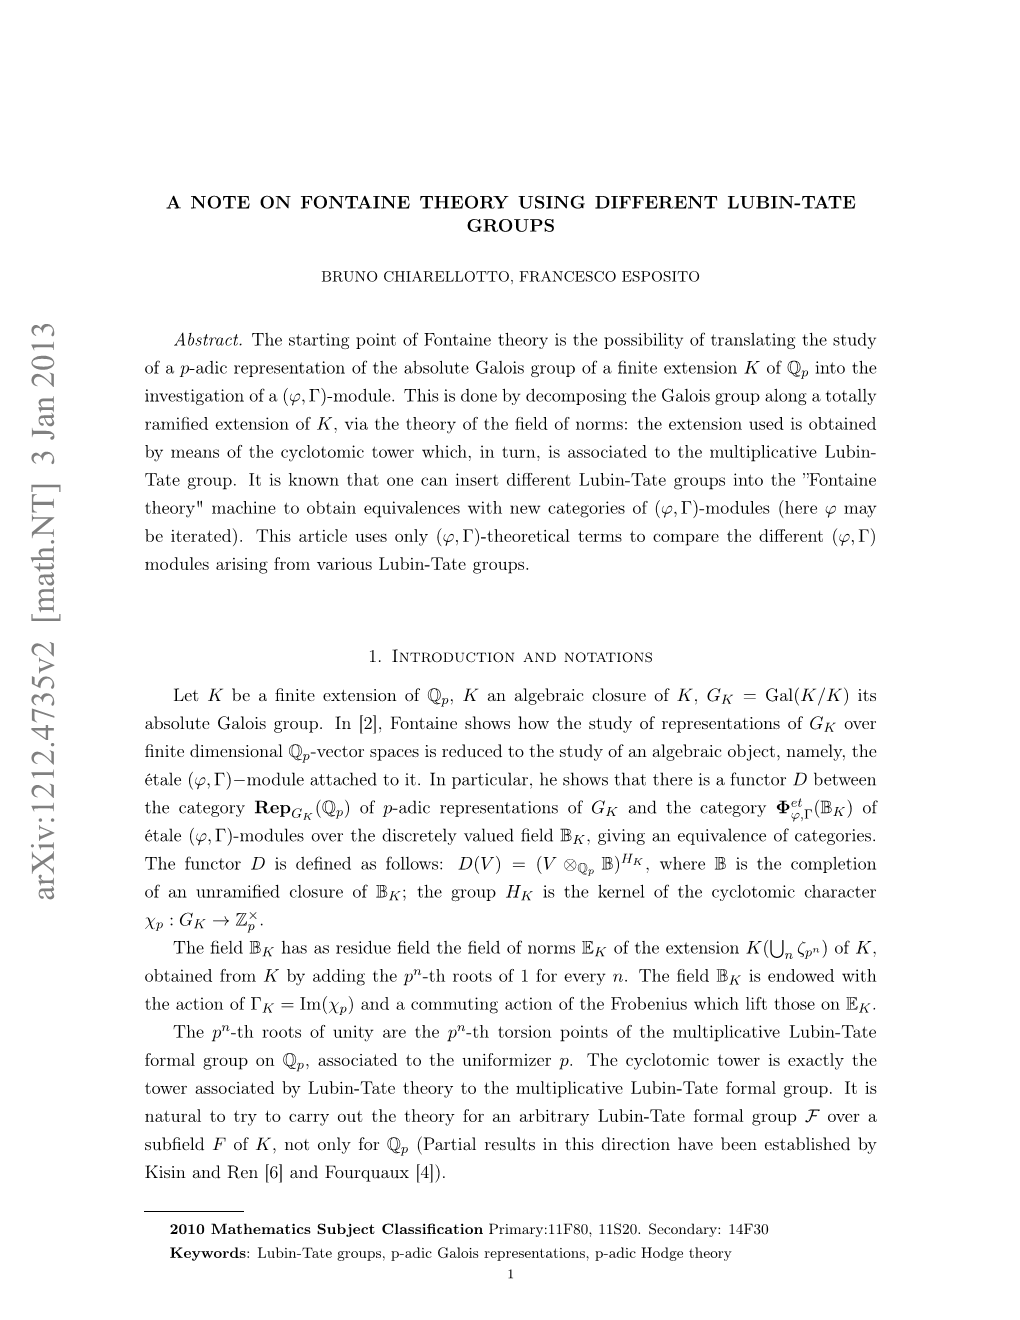 A NOTE on FONTAINE THEORY USING DIFFERENT LUBIN-TATE GROUPS 3 Extensions of F and K Given by Lubin-Tate Theories and Their Relative Position